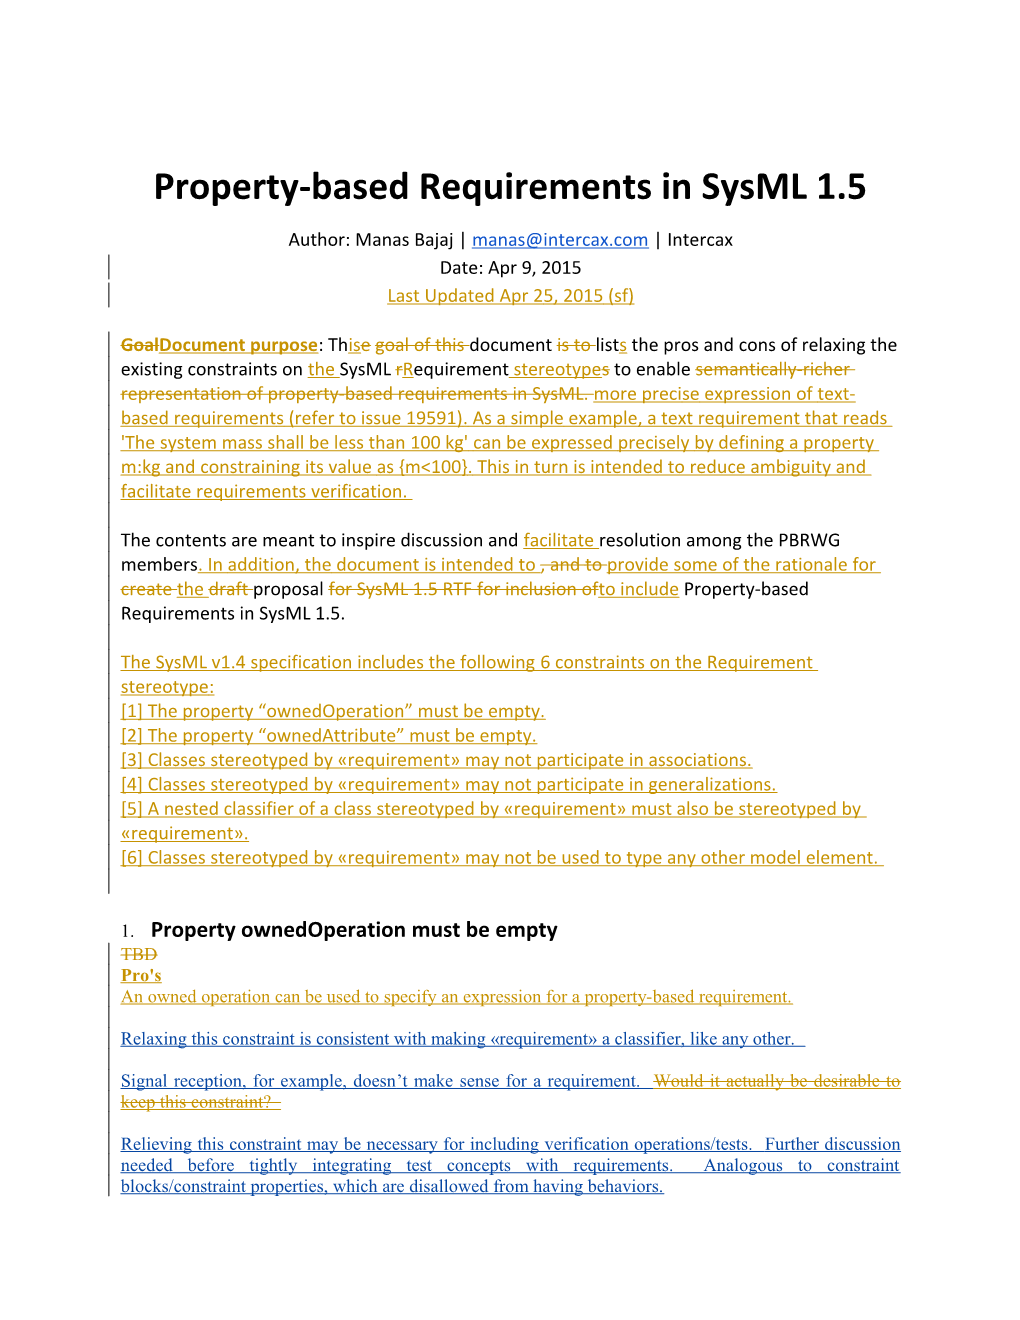 Property-Based Requirements in Sysml 1.5 RS1